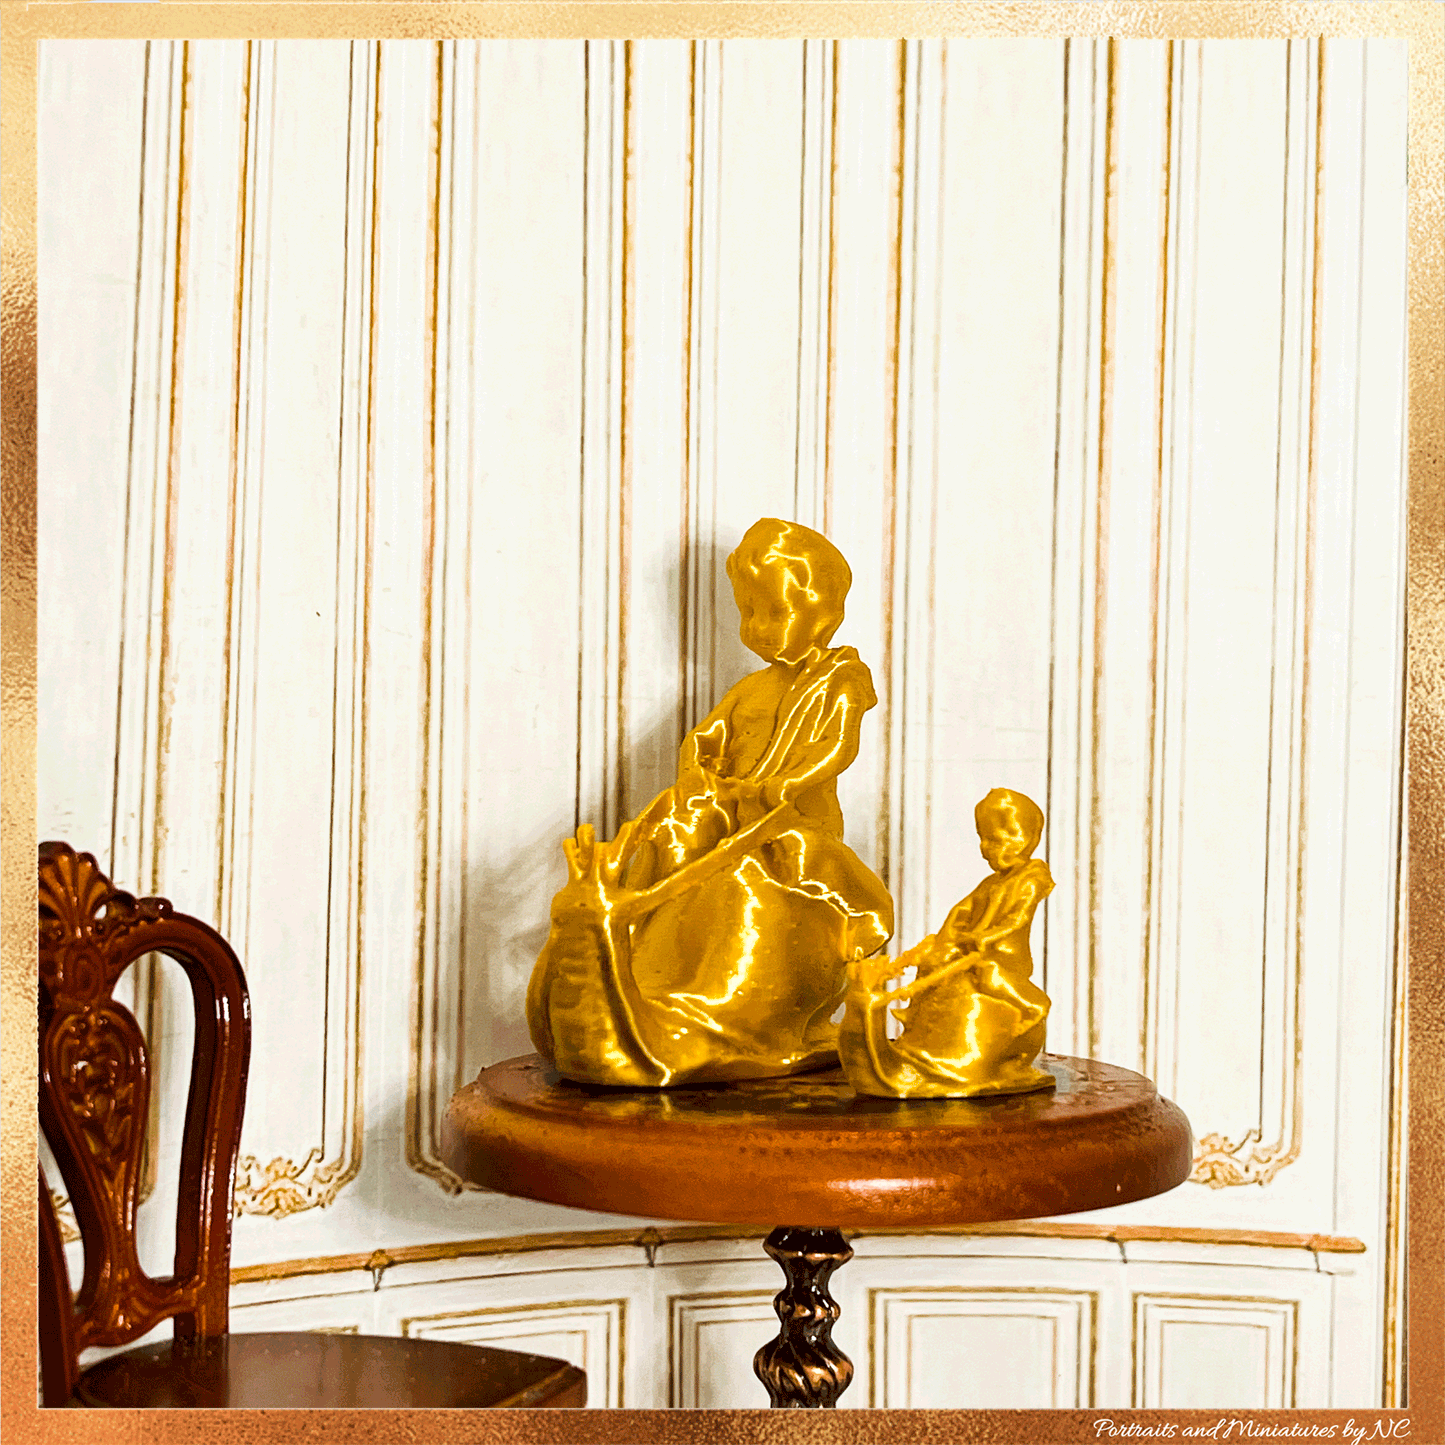 Cherub on Snail Dollhouse accessory 1/24 and 1/12 scale front views